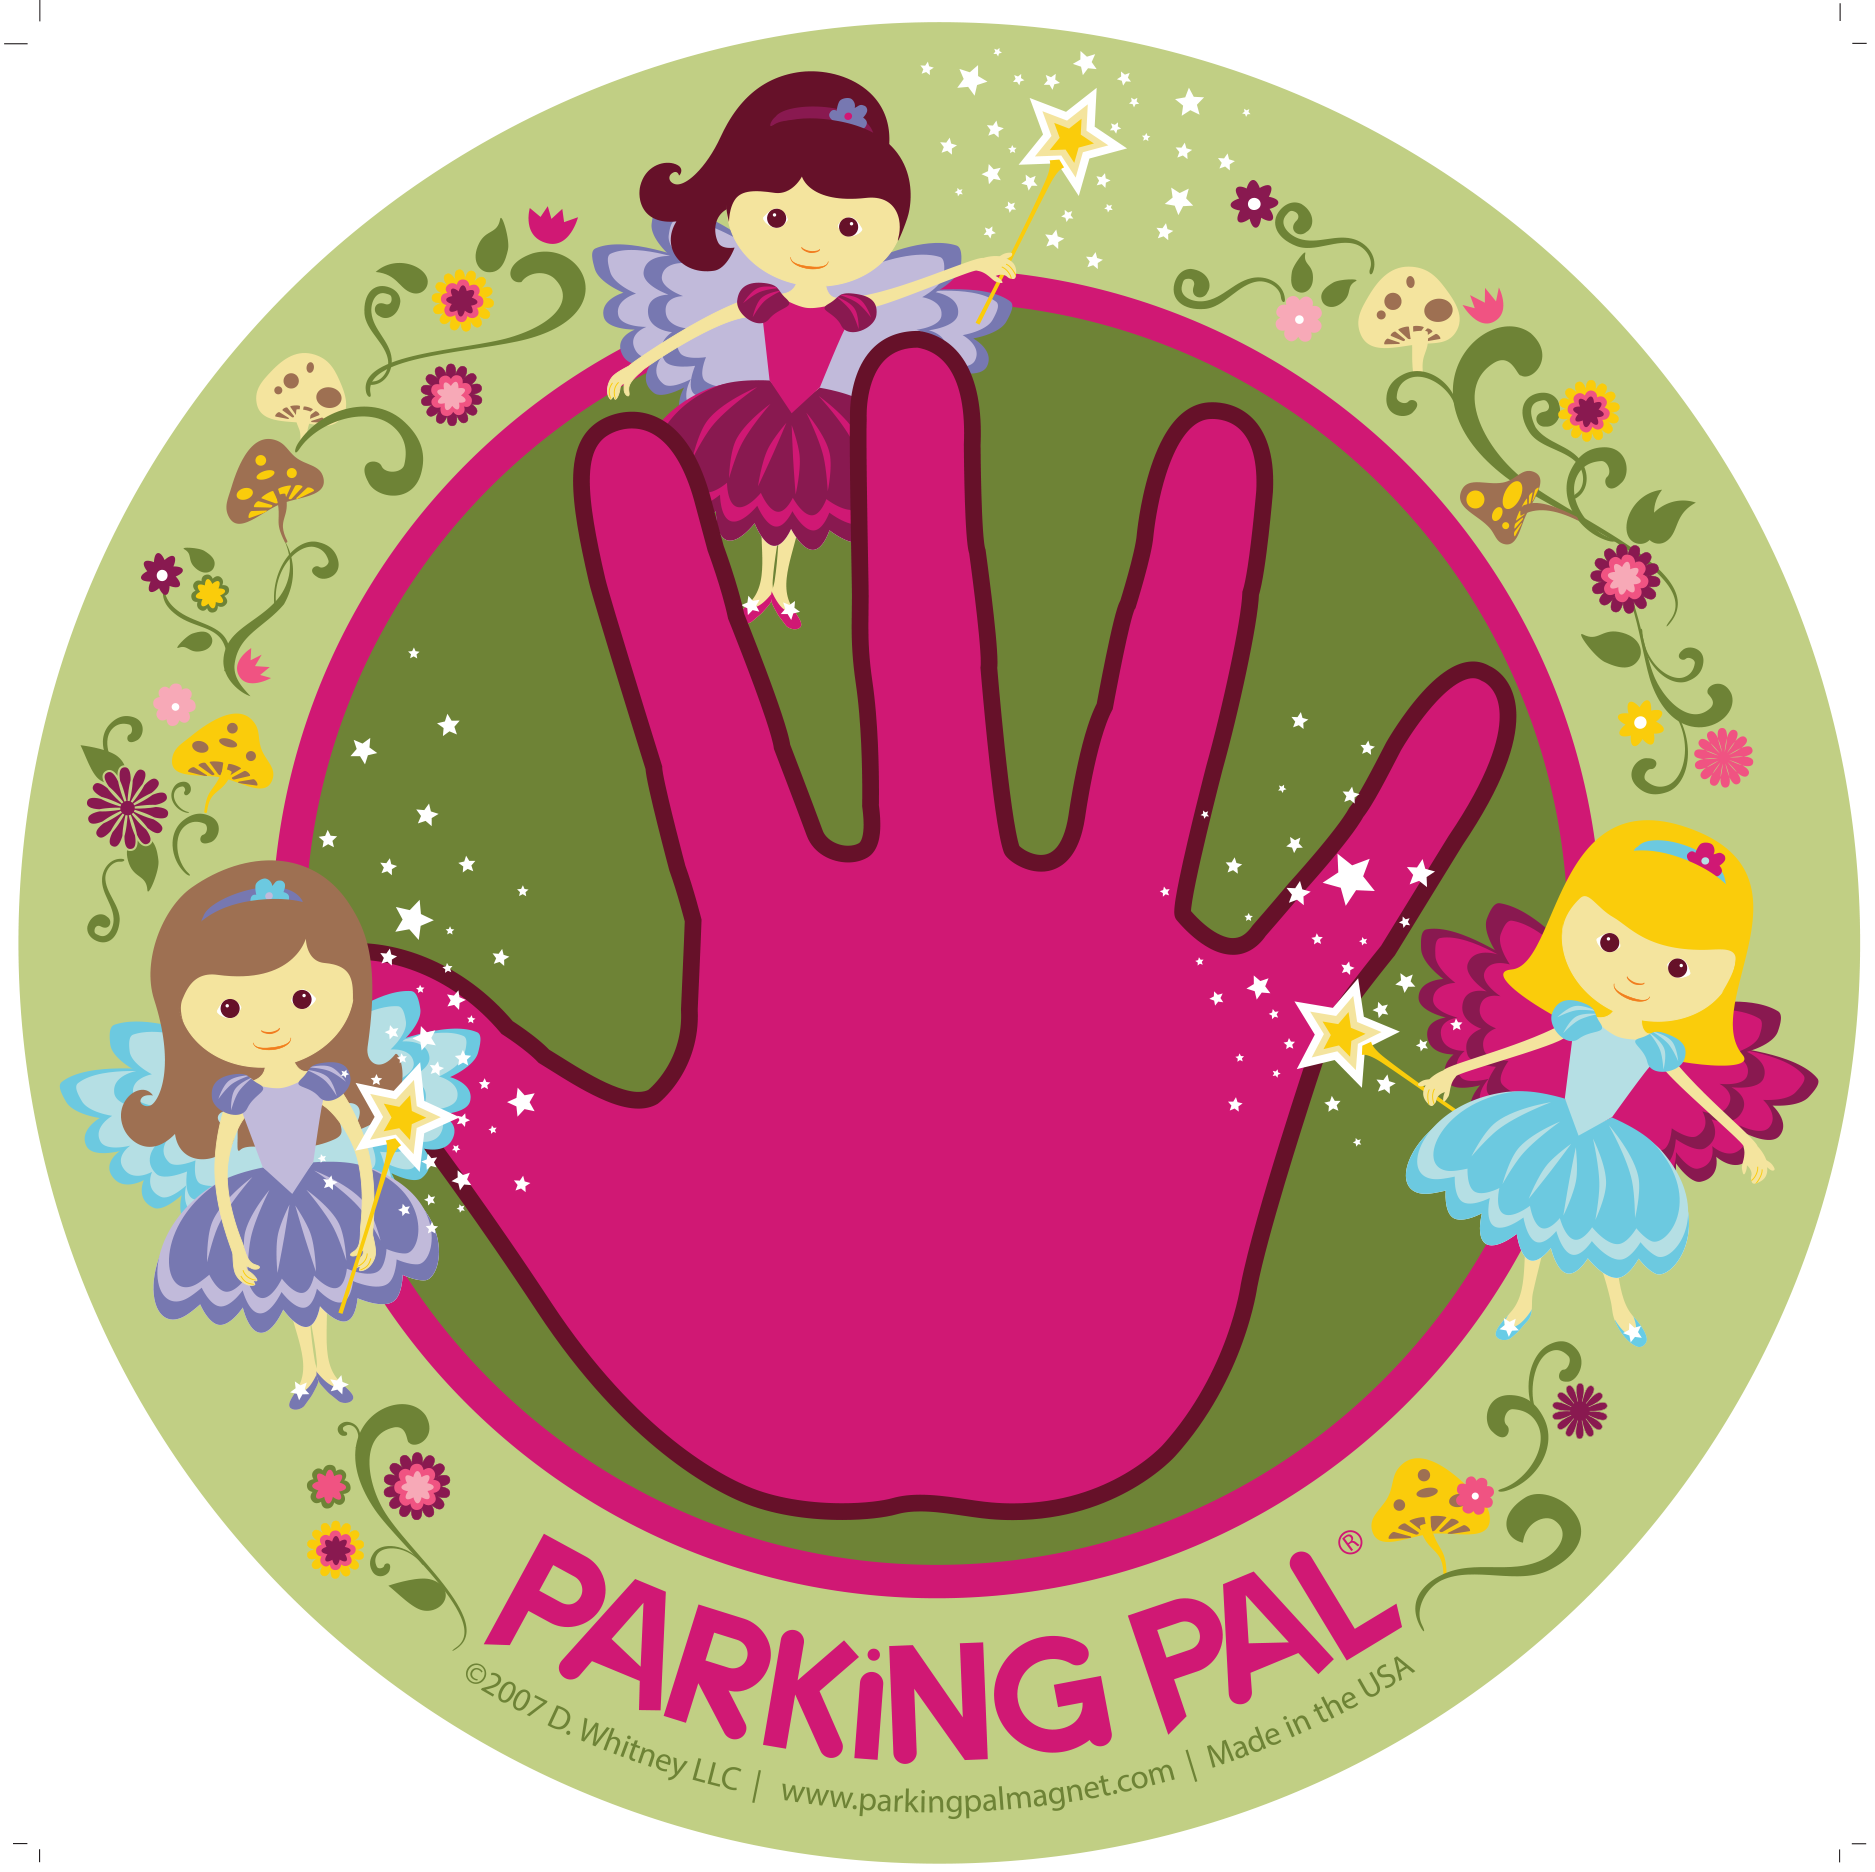 Fairy pink hand print removable car magnet toddler safety around vehicles in parking lots